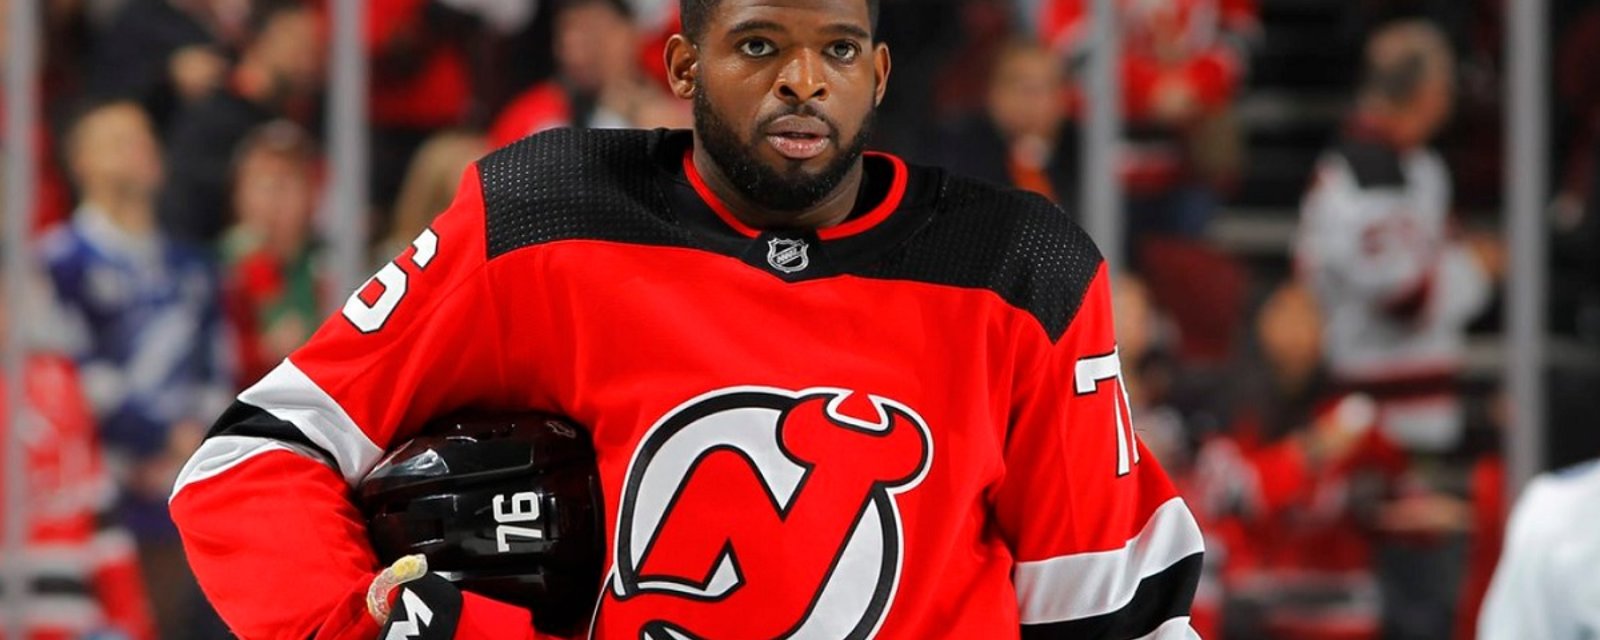 P.K. Subban claims he's still one of the top defensemen in the league.